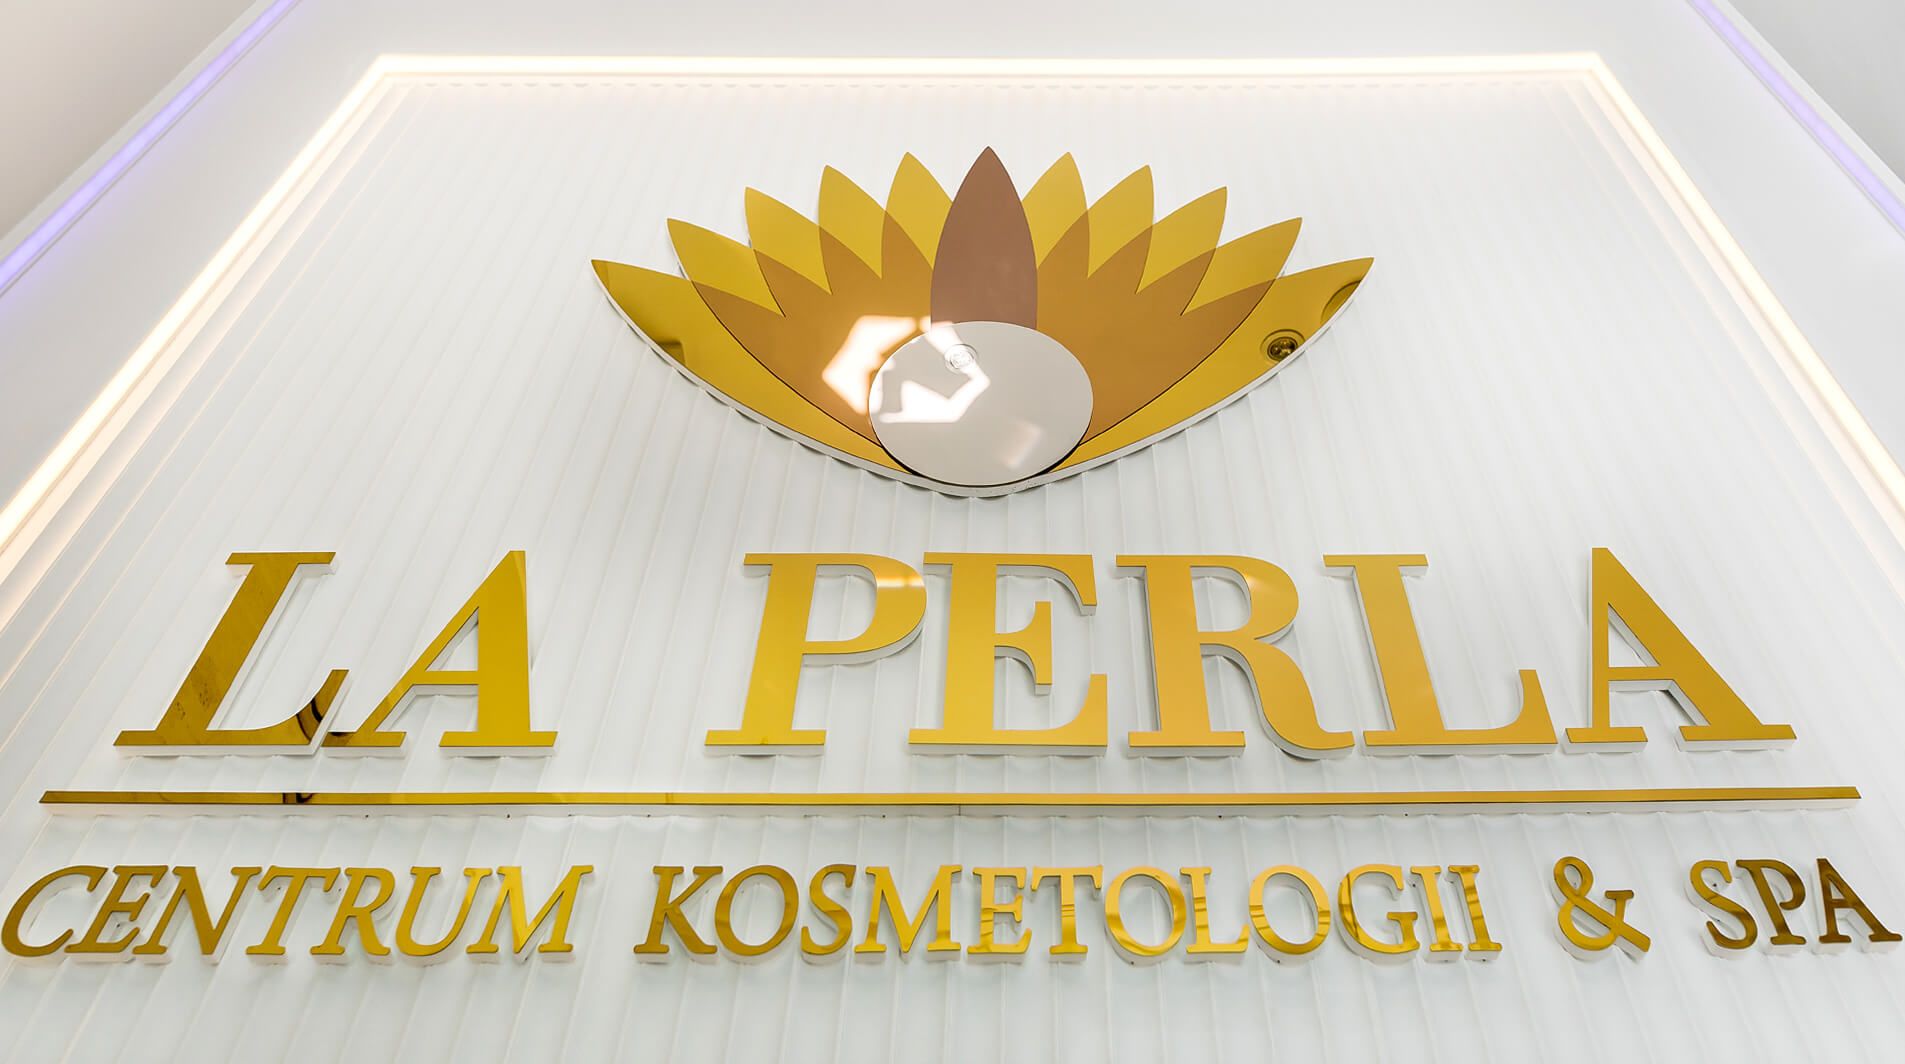 LA PERLA - 3D spatial letters in gold with logo